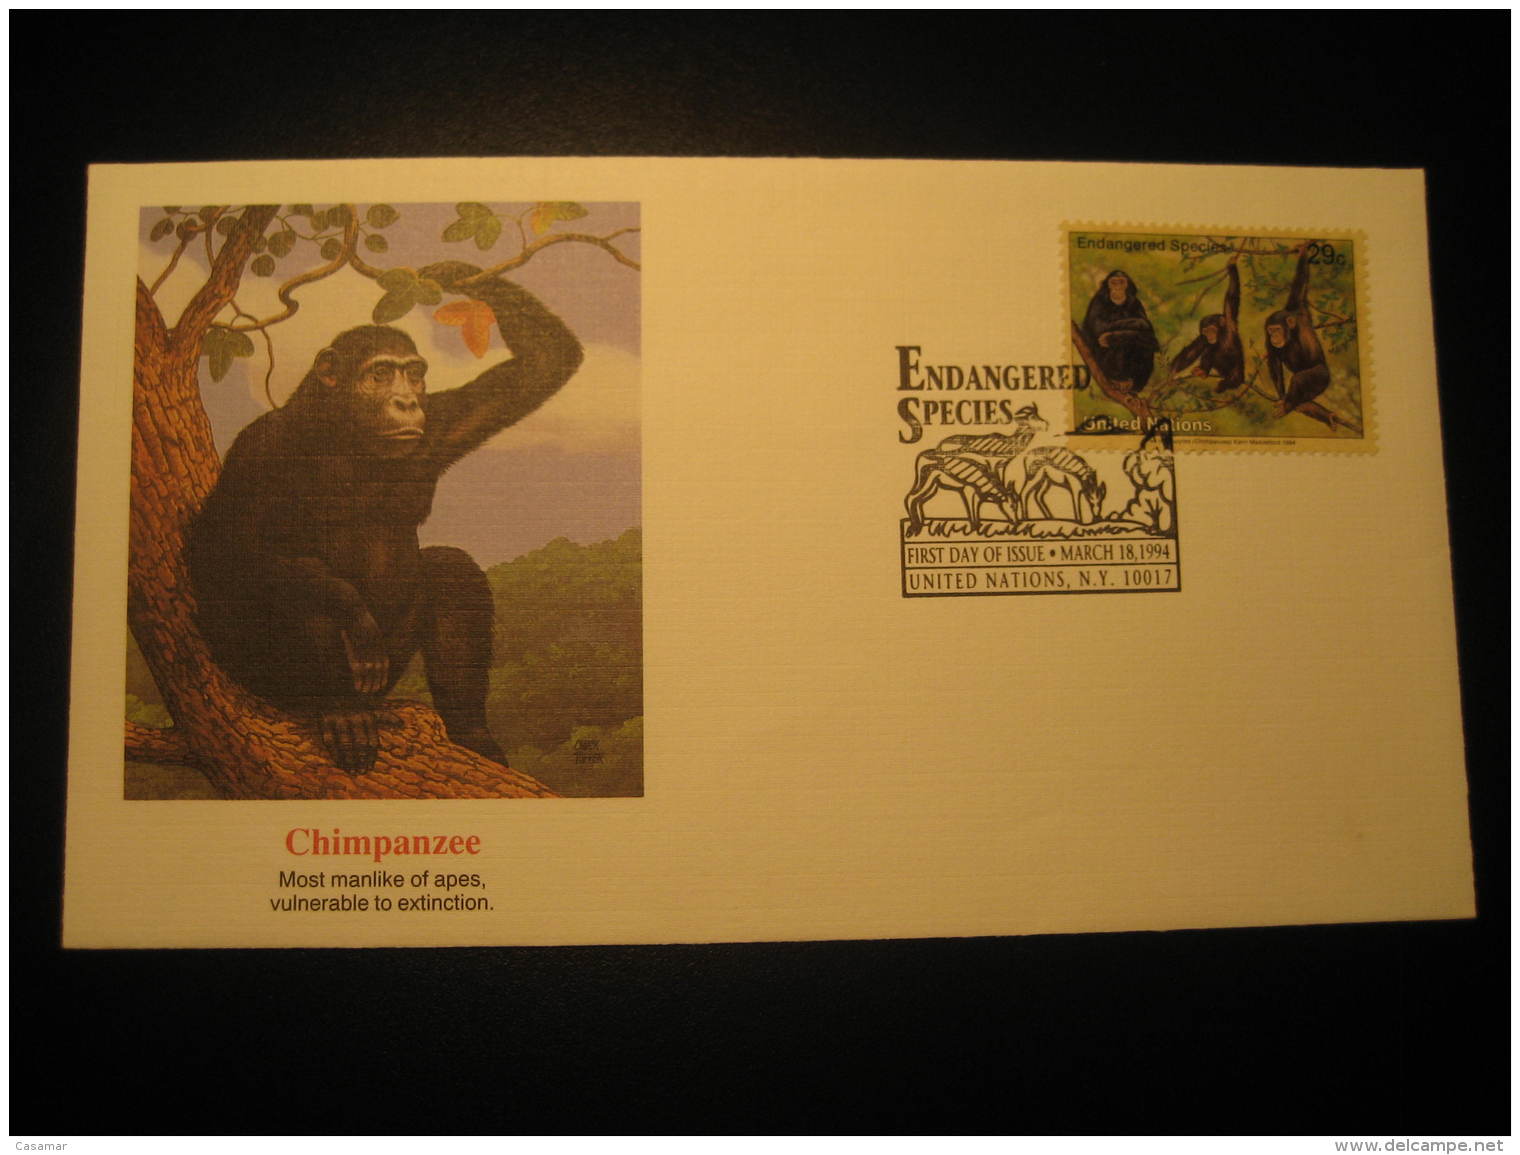 CHIMPANZEE Endangered Species United Nations NY USA FDC Cancel Cover 1994 - Chimpanzees